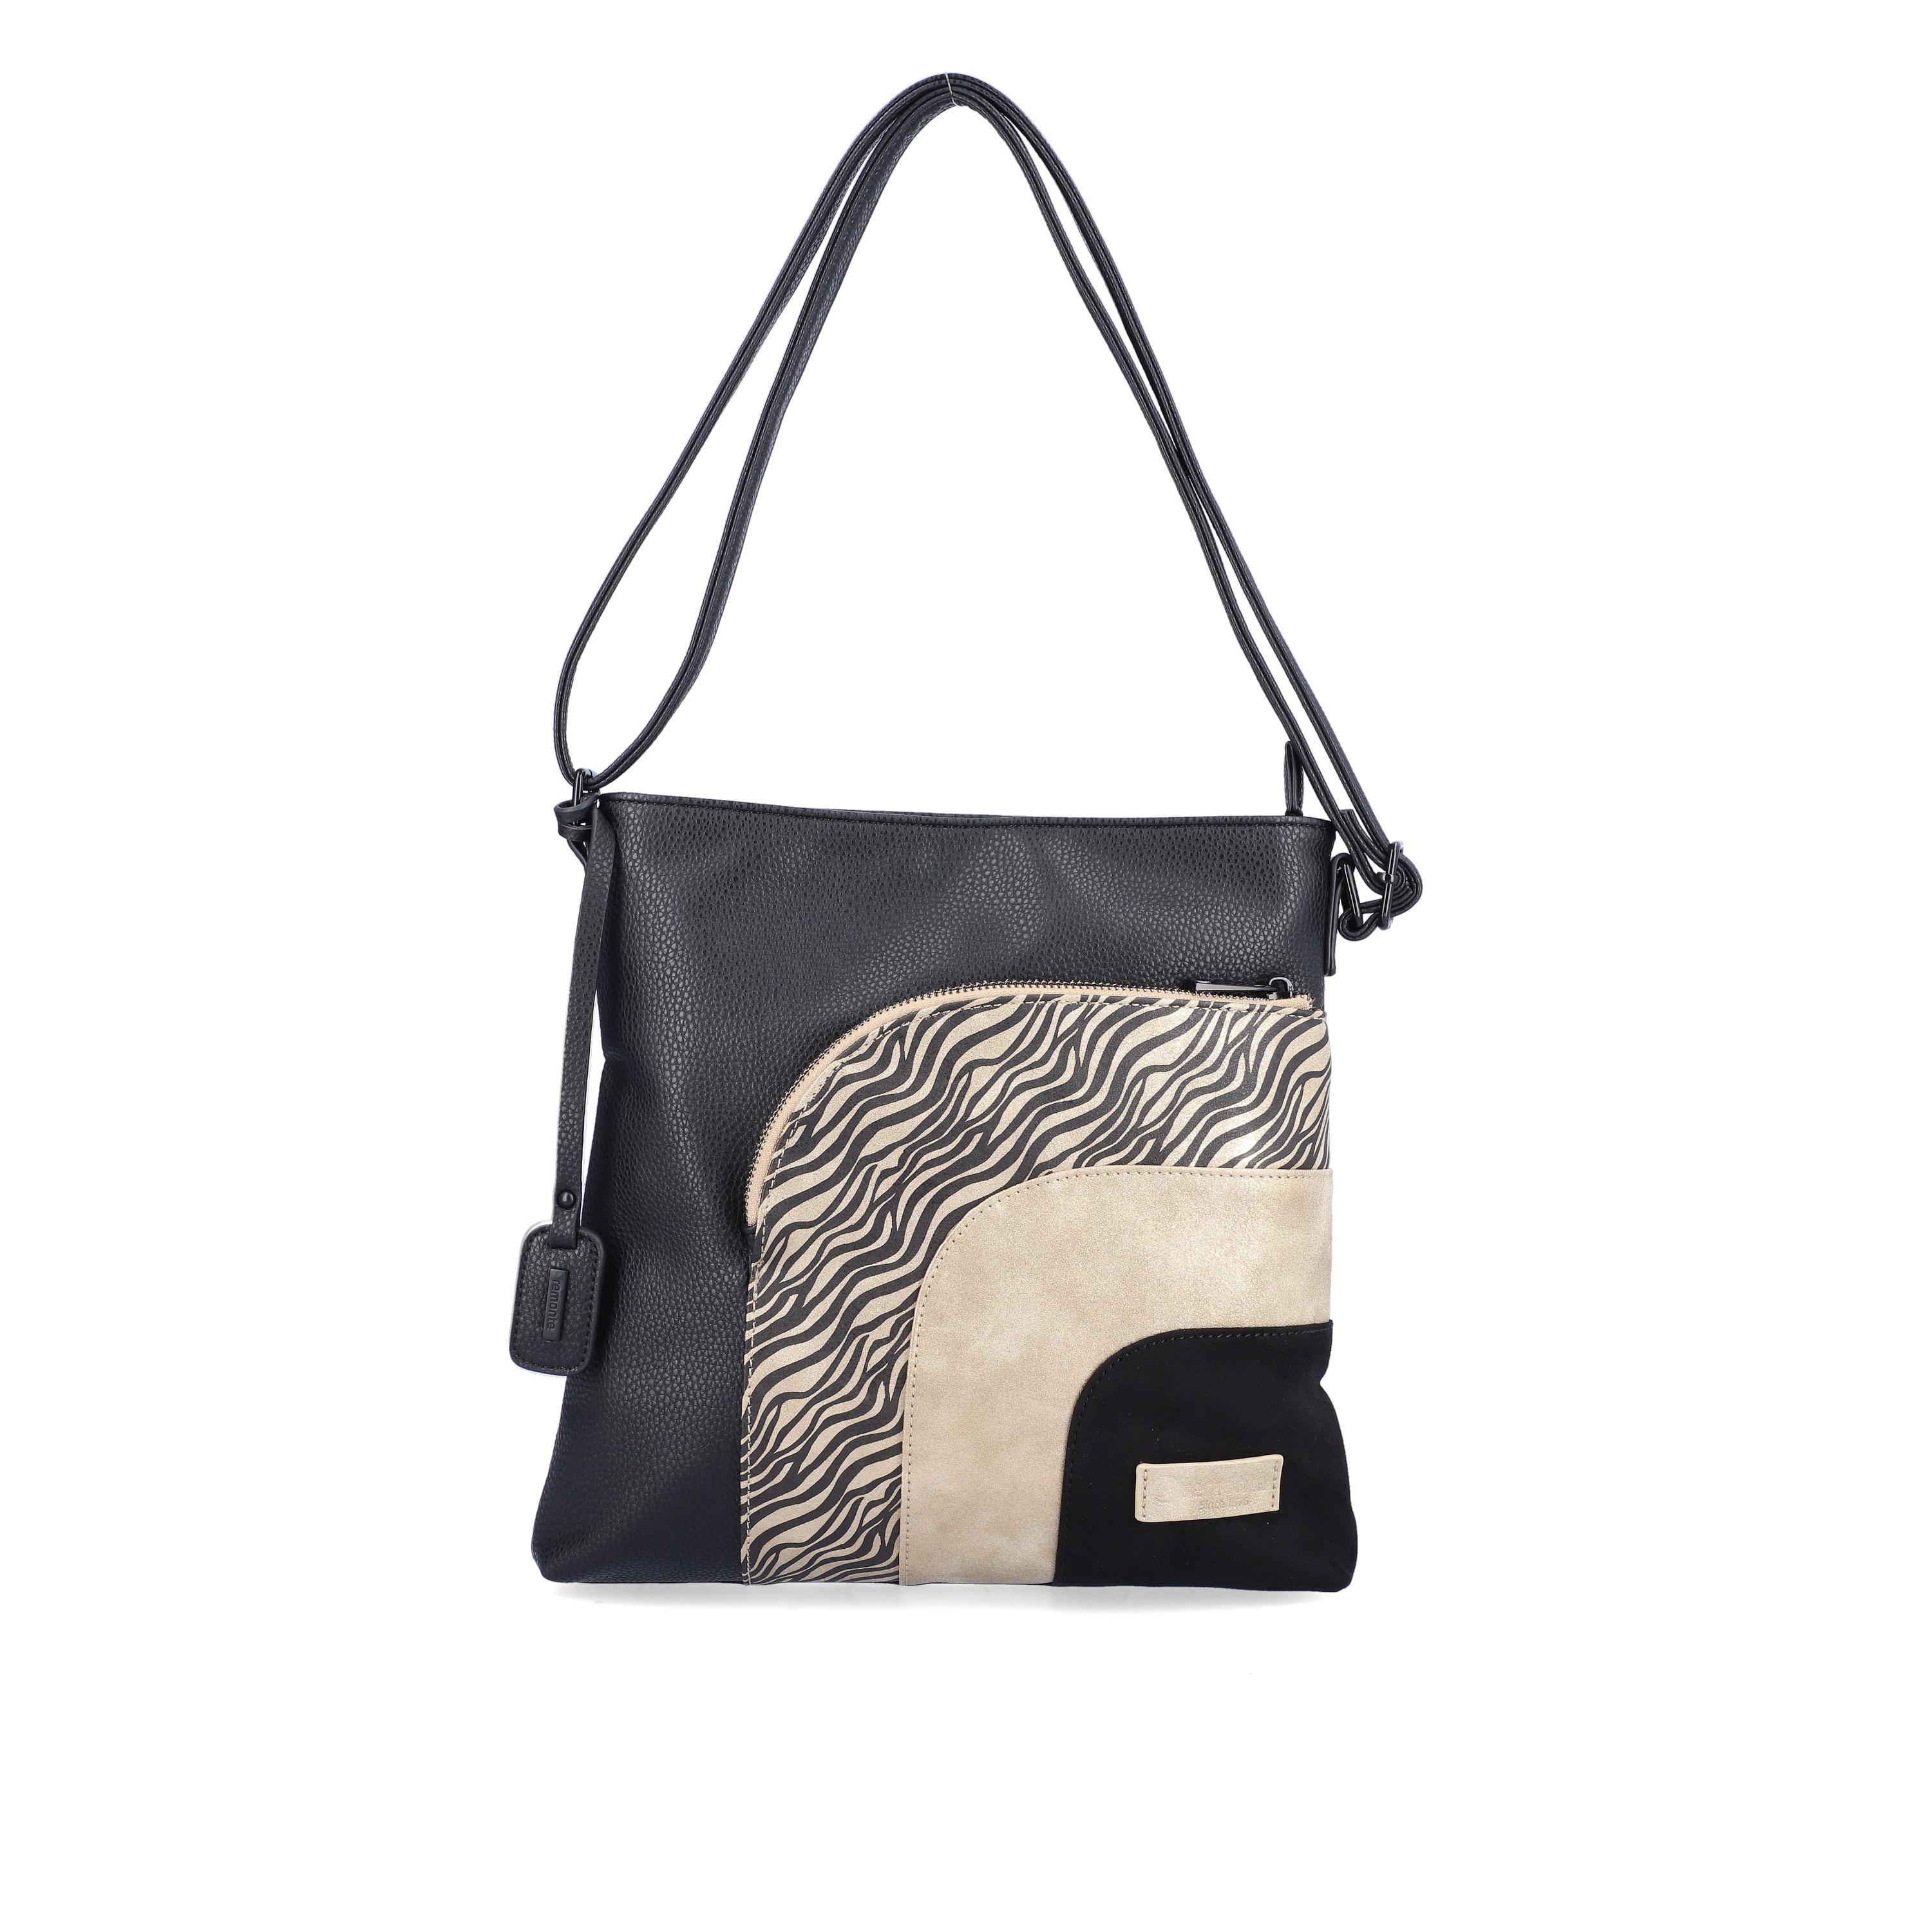 remonte women´s bag Q0705-03 in black-beige made of imitation leather with zipper from the front.